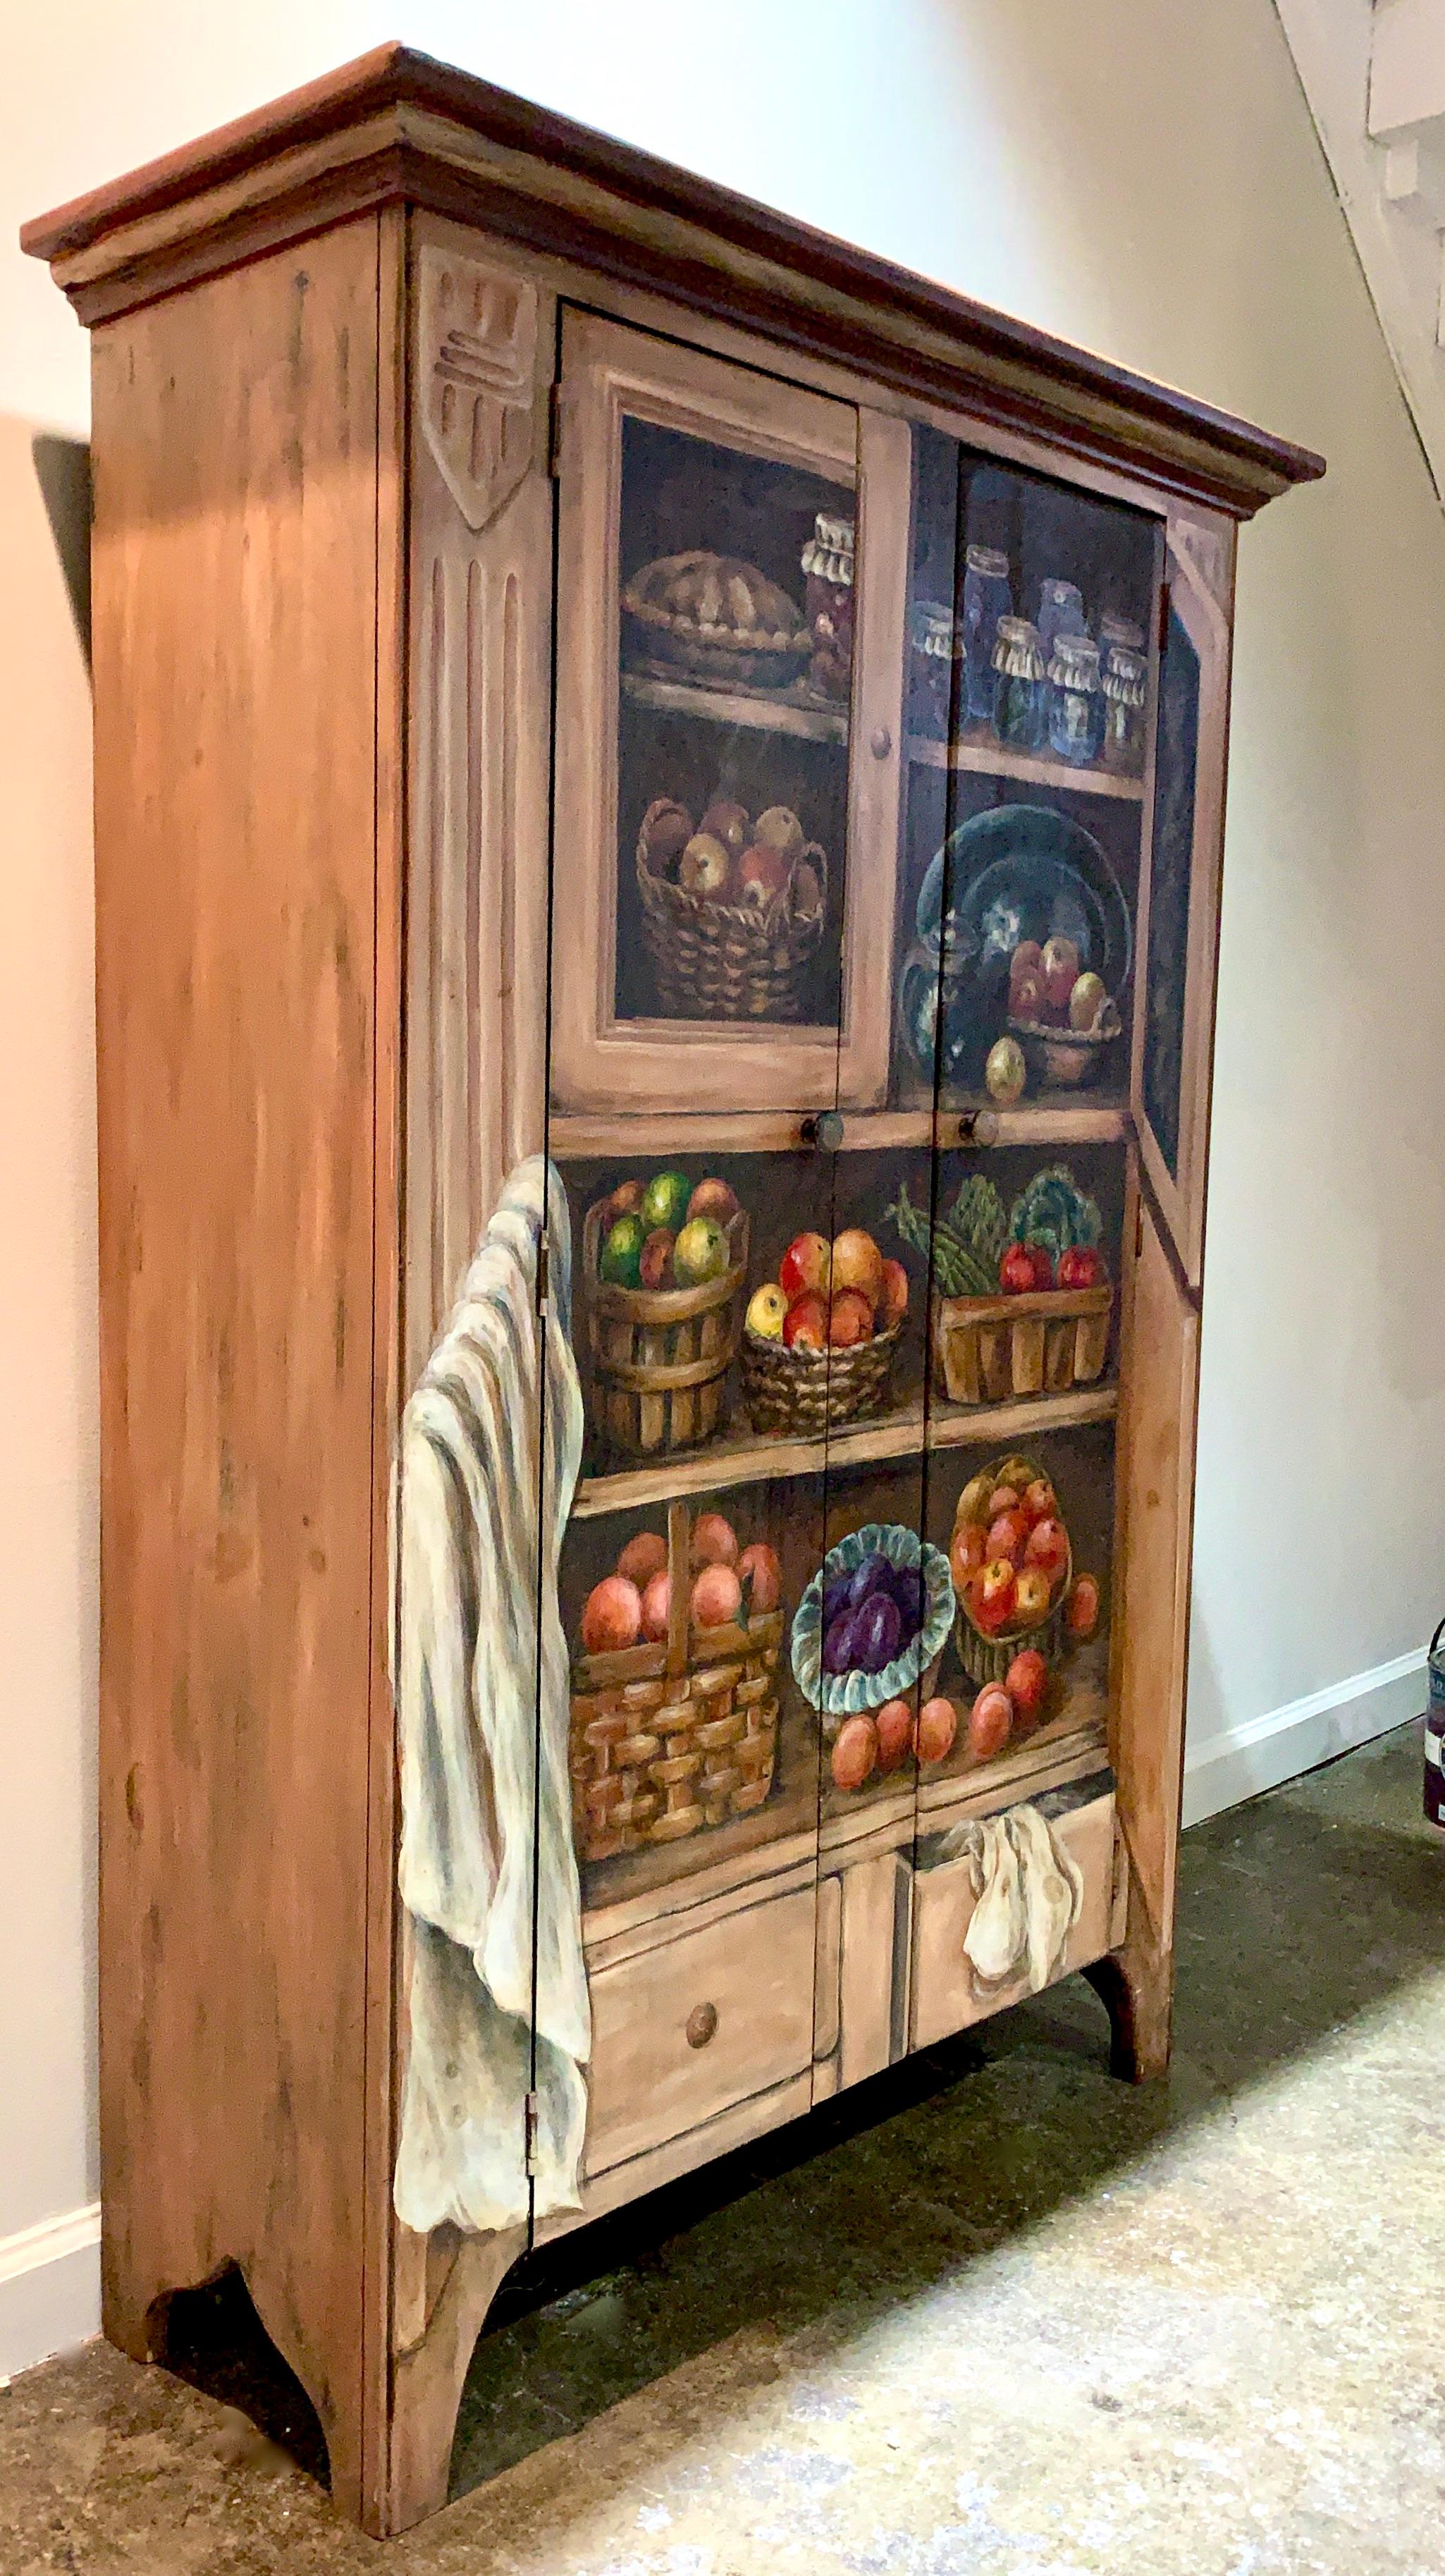 Habersham hand painted Trompe l'Oeil fruits and vegetables oak cabinet cupboard. One-of-a-kind, signed and dated by the master artisan. MSRP for custom pieces such as this from Habersham hover around the 10-12,000 USD region. 

Habersham was founded